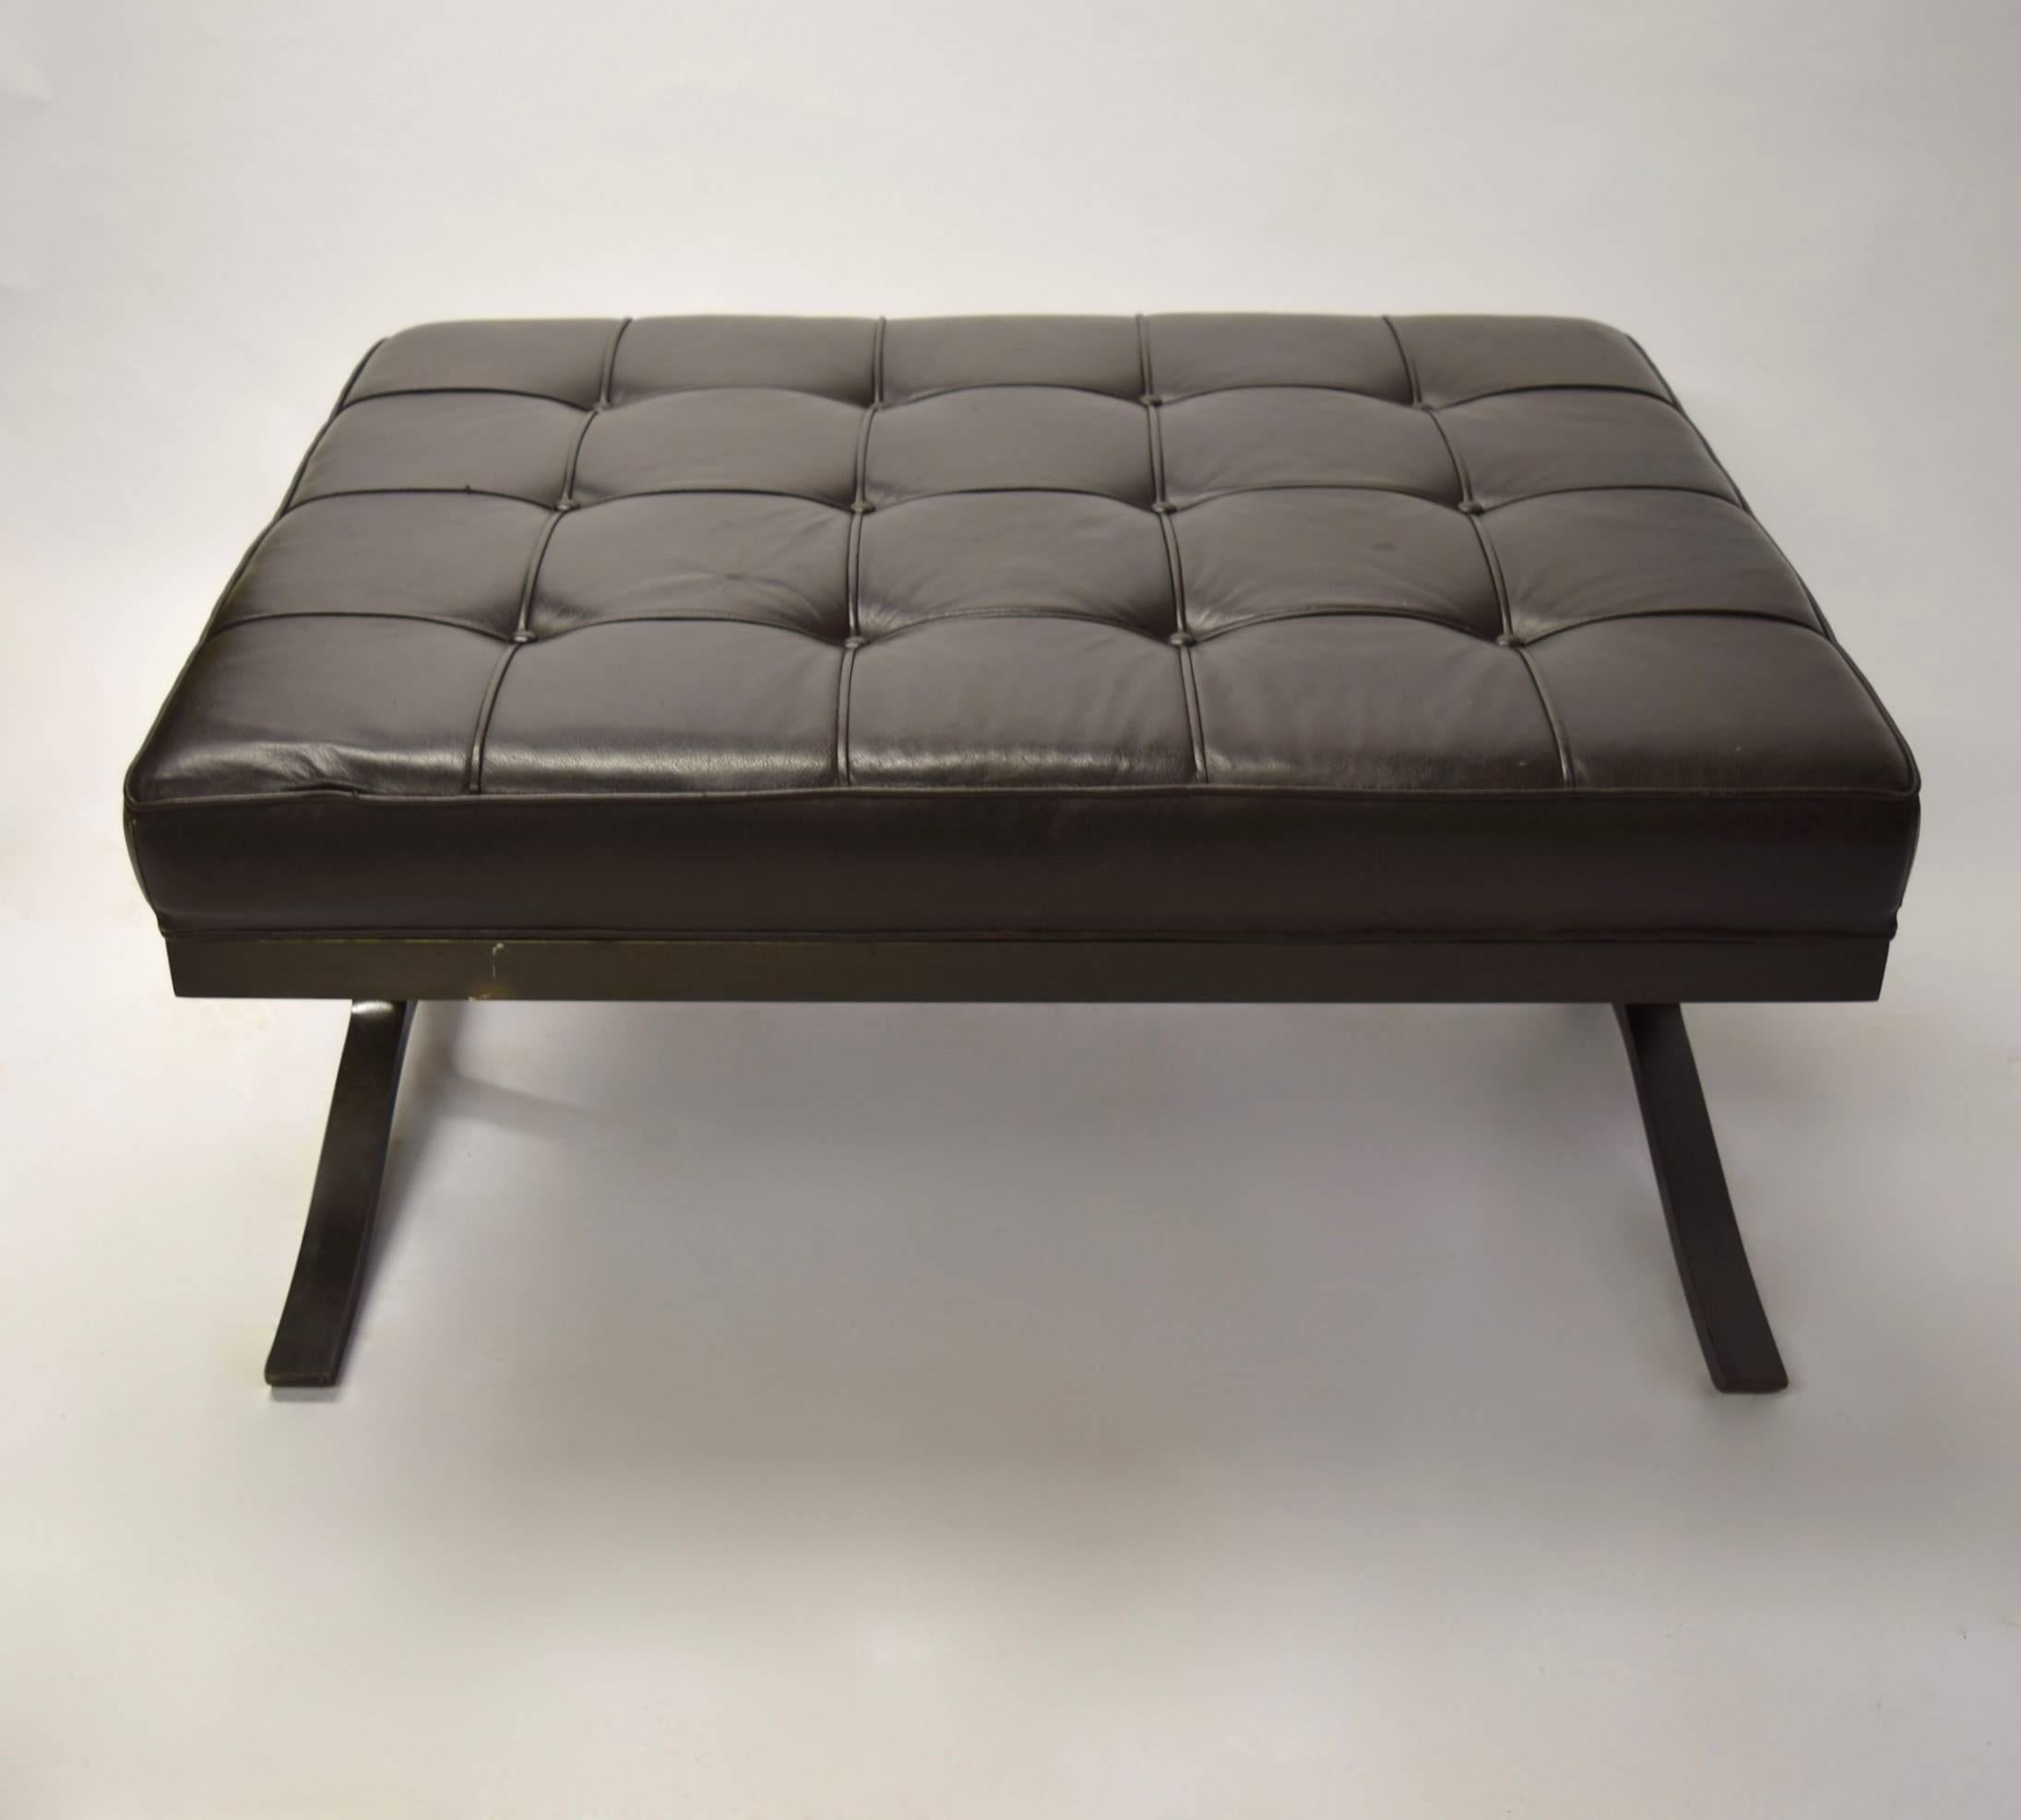 Original bench has a solid patinated bronze frame with original brown tufted leather seat.
Was available by special order only from 1963-1999.
In 2000 the bench was revised to a more rectangular shape.

  